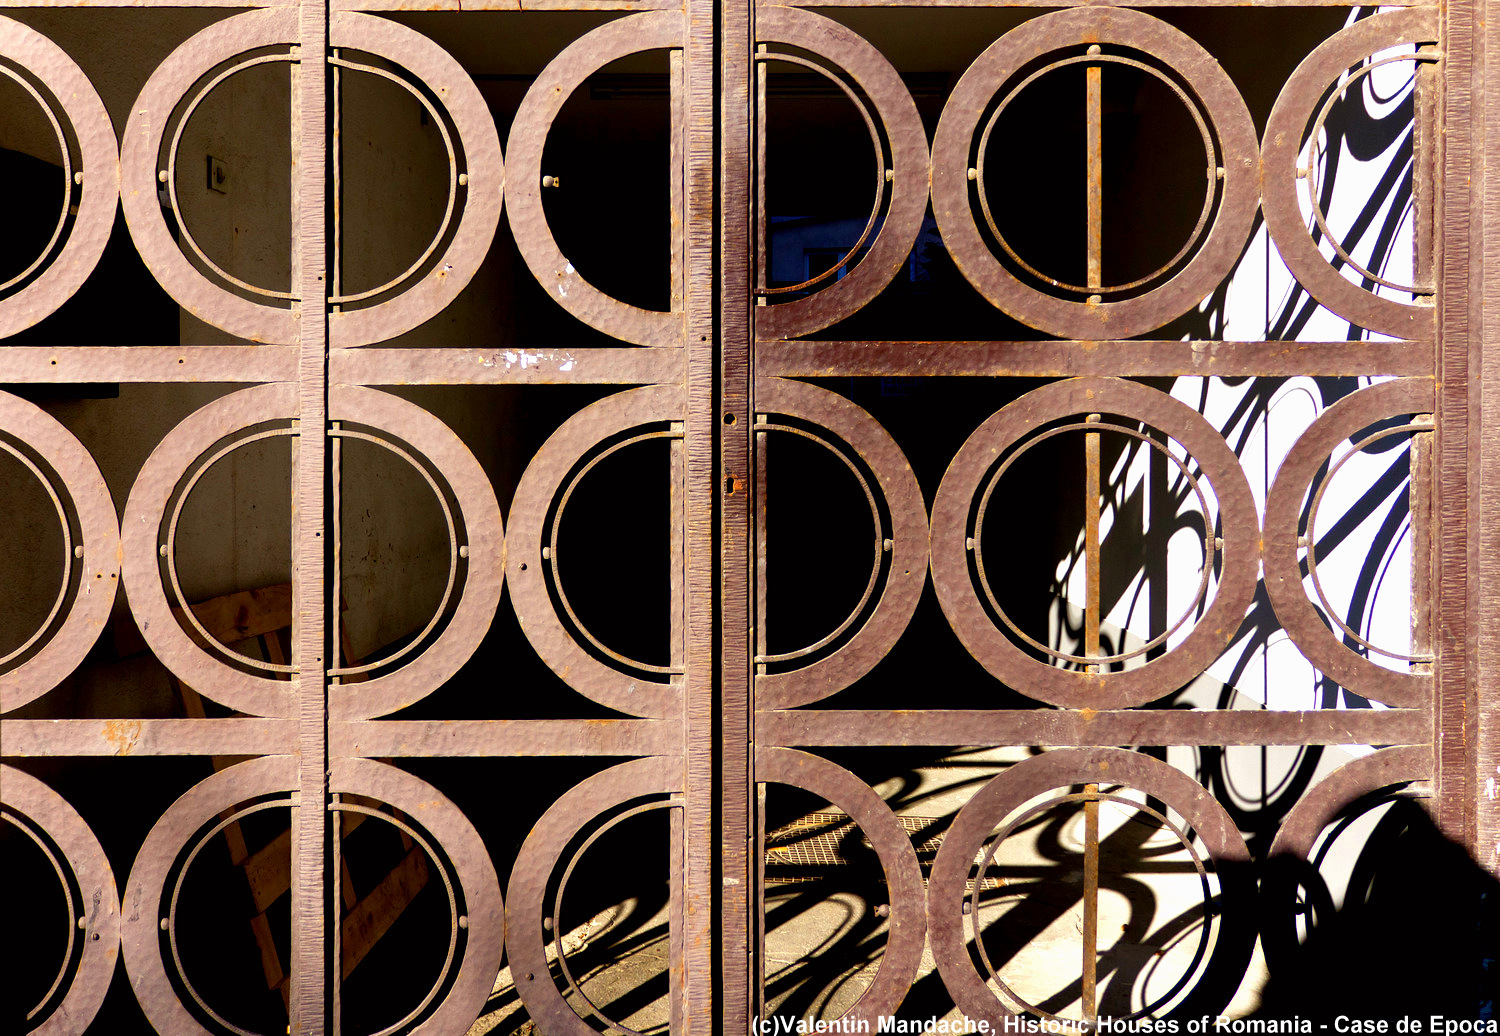 Art Deco style gate, dating from the mid 1930s, Piata Romana area, Bucharest